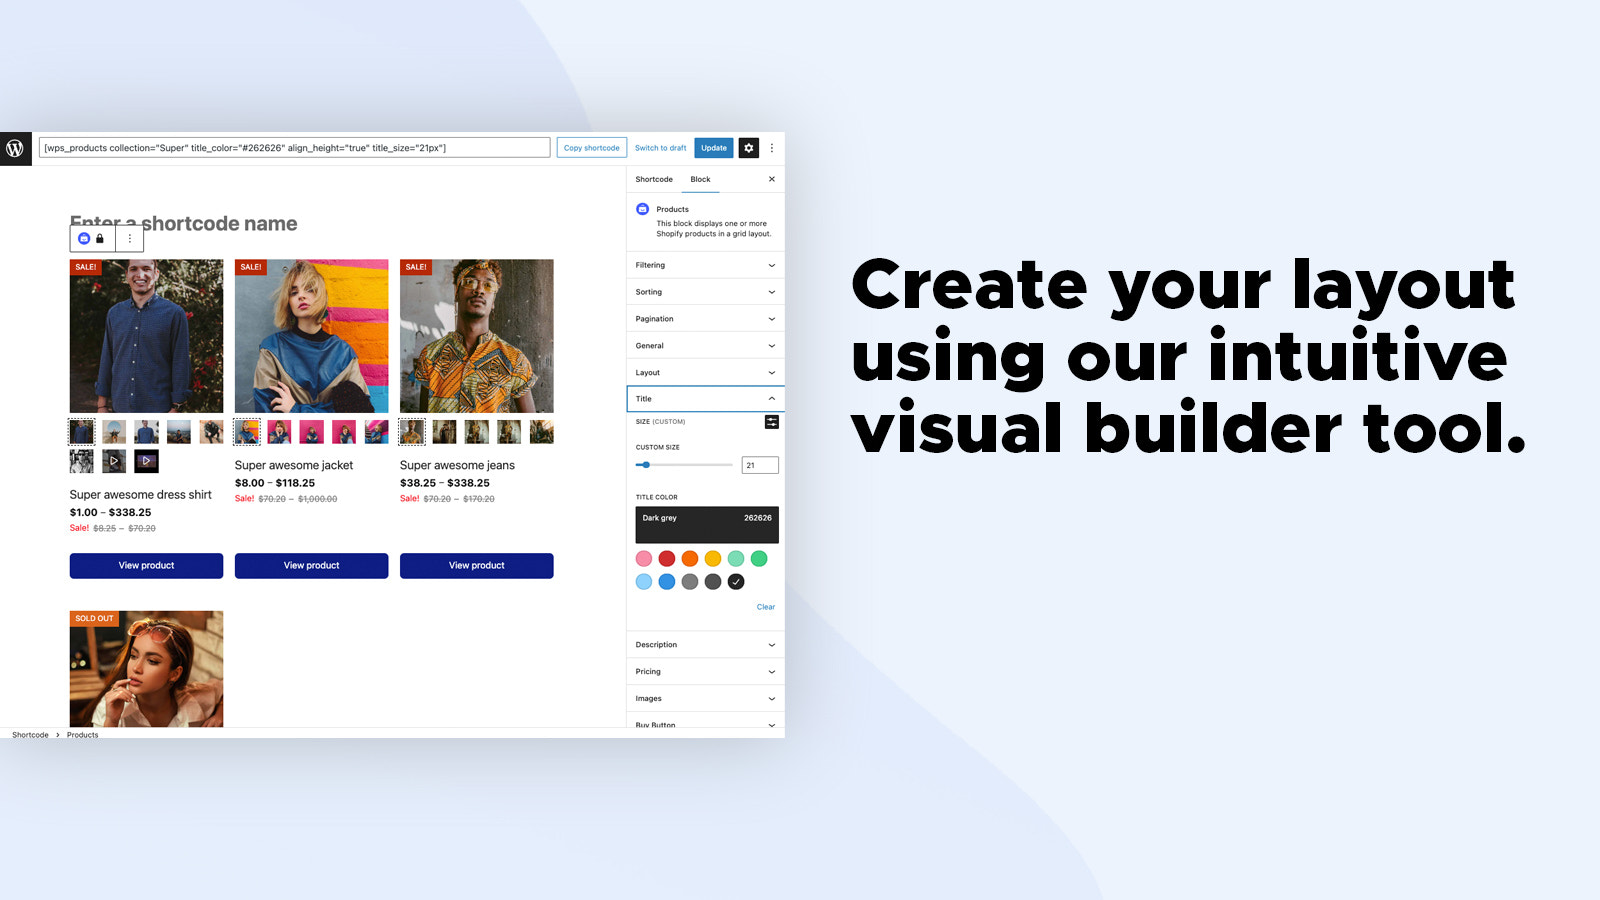 Create your layout using our intuitive visual builder tool.